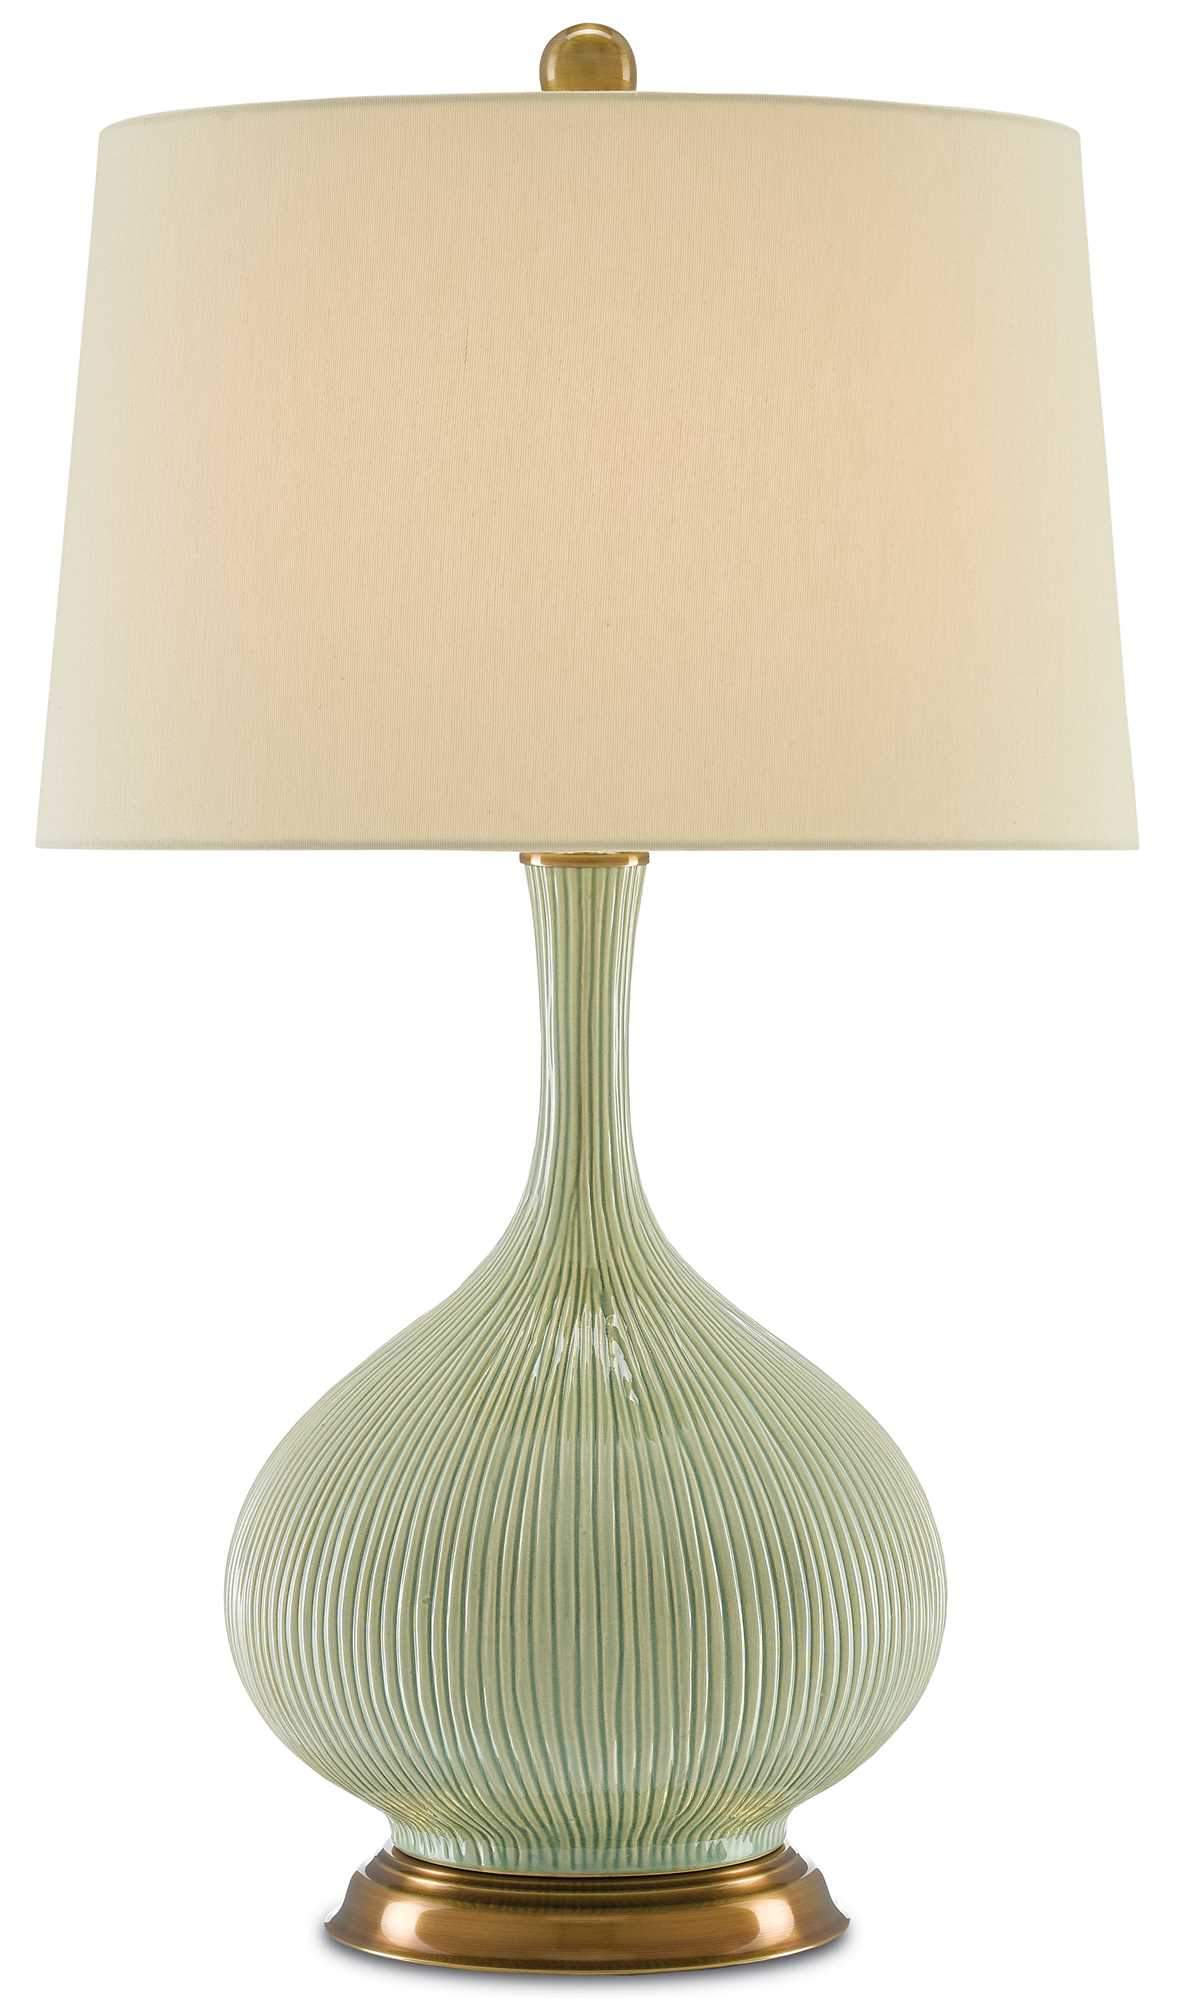 Cait Table Lamp design by Currey and Company